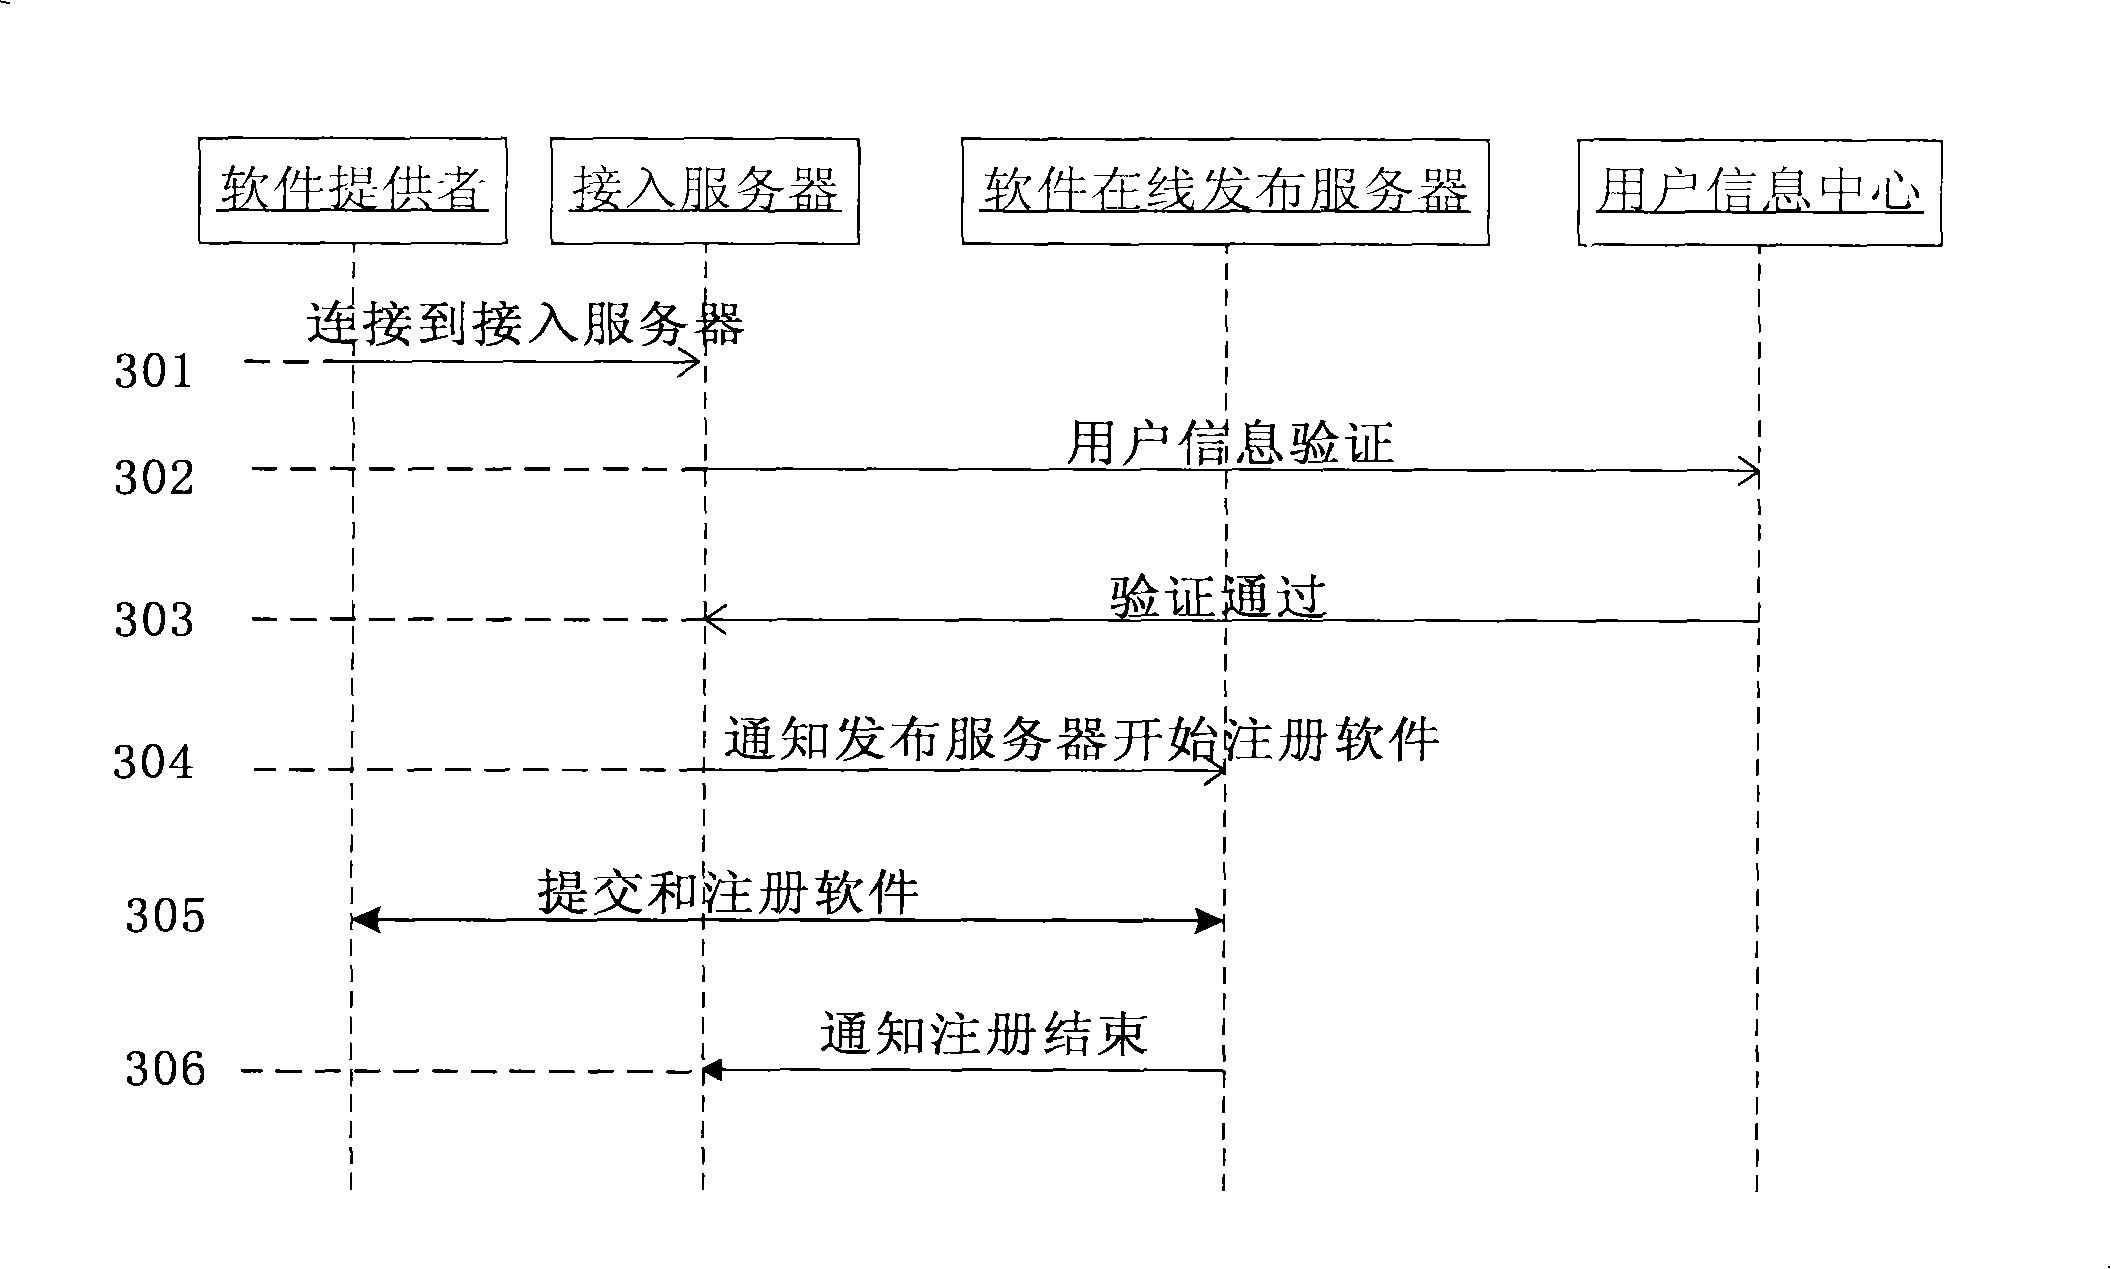 Method and system for online issue and use of software